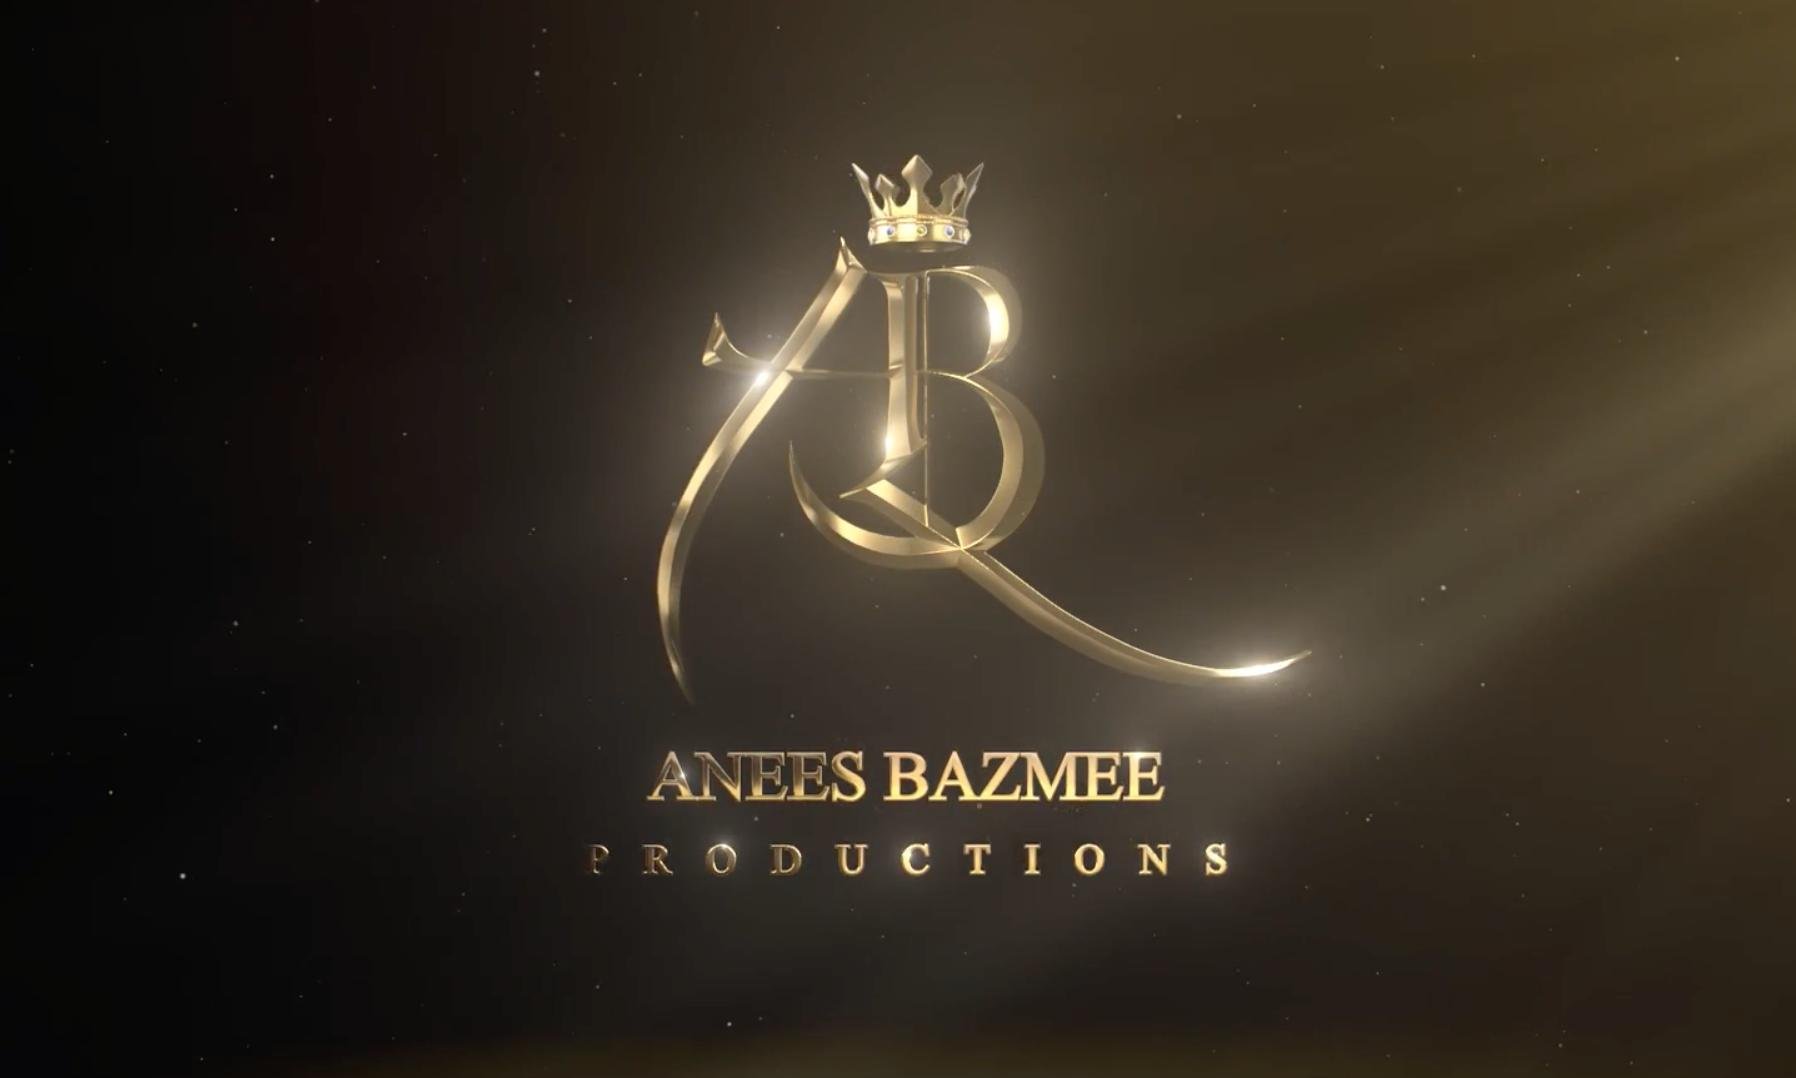 Anees Bazmee is now ready to don the producer’s hat and will be announcing some exciting new projects under his banner Anees Bazmee Productions.
Stay tuned....